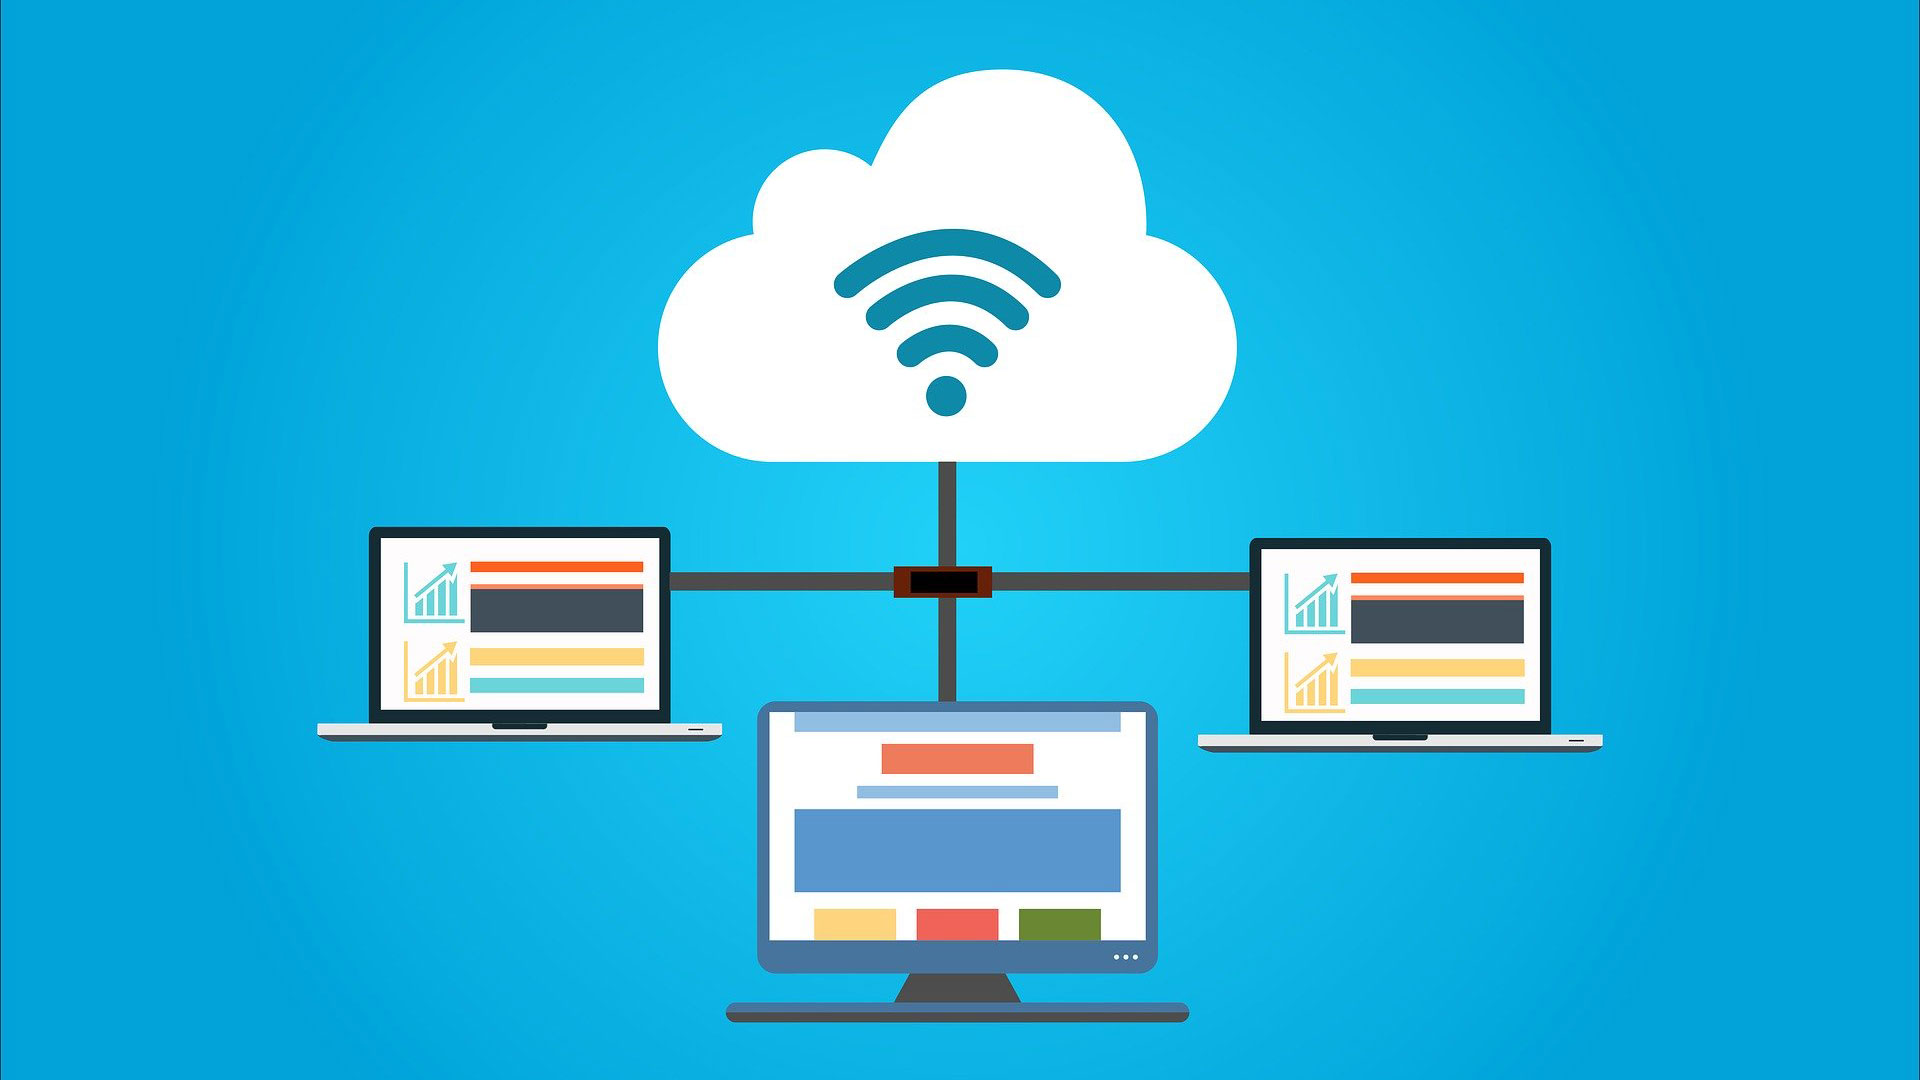 An Introduction to Cloud Computing Part 4 - IaaS